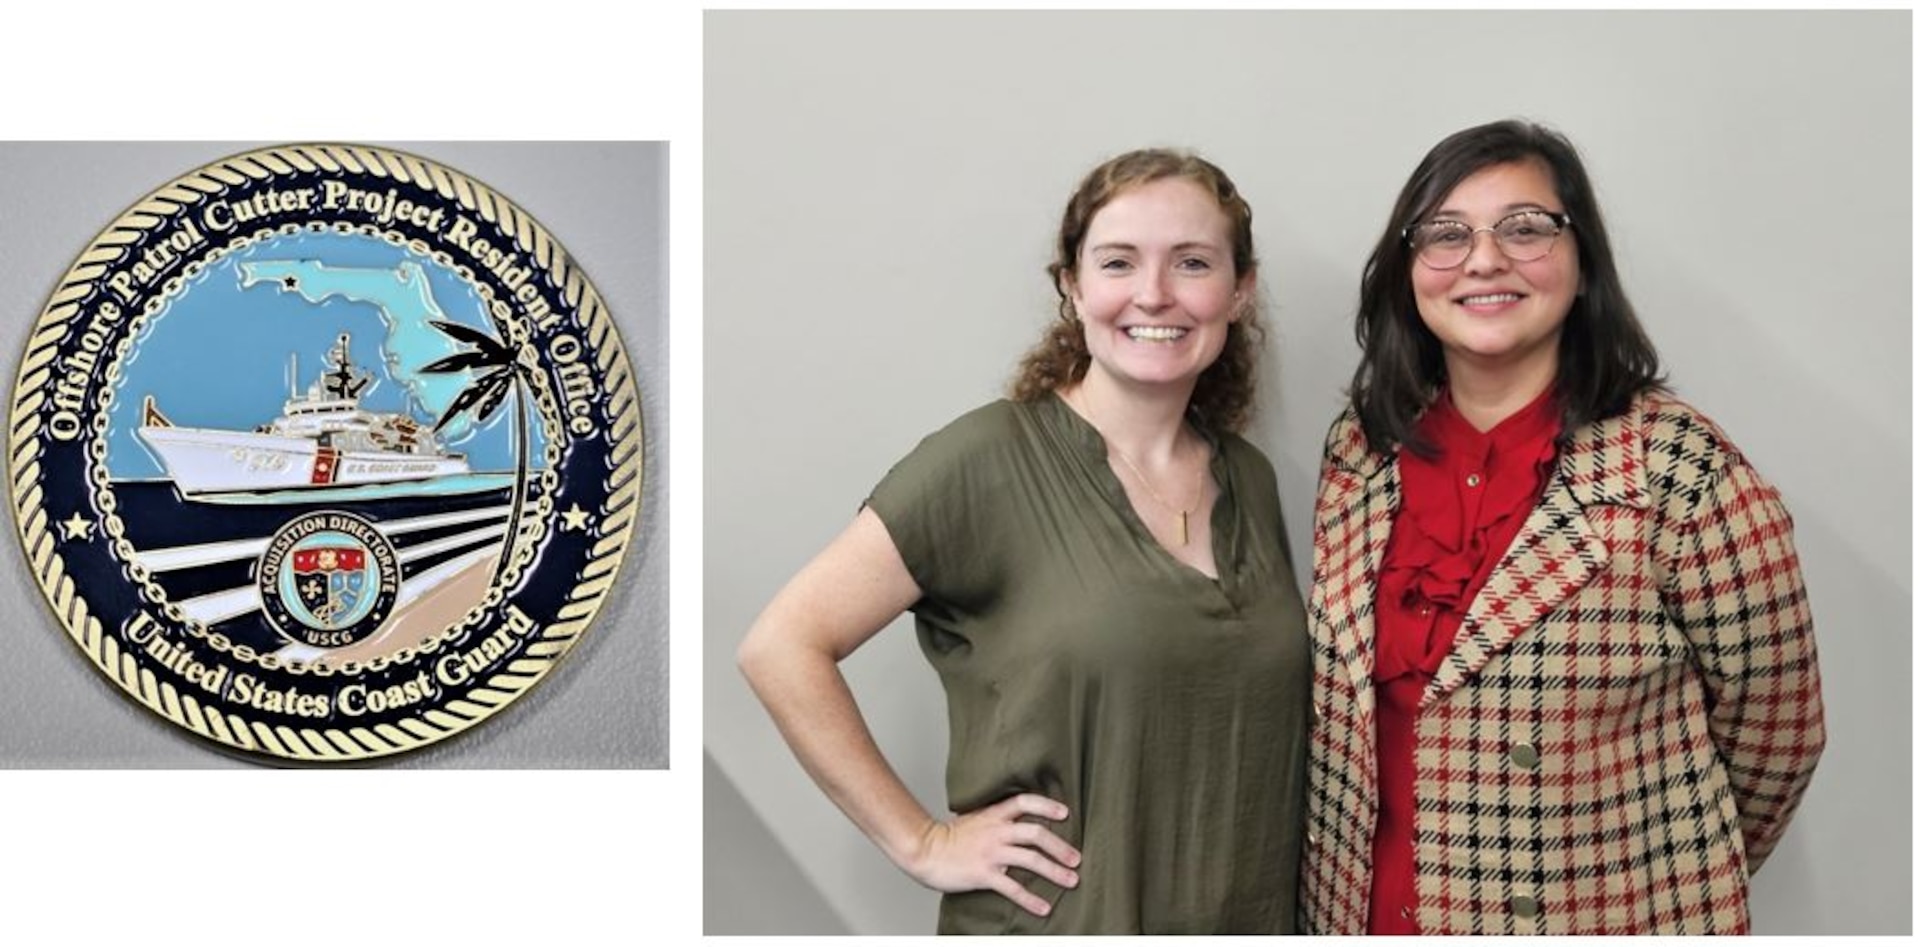 The United States Coast Guard’s (USCG) Offshore Patrol Cutter (OPC) Project Resident Office administration Commander Coin and a photo of two professional people posing together against a plain background.